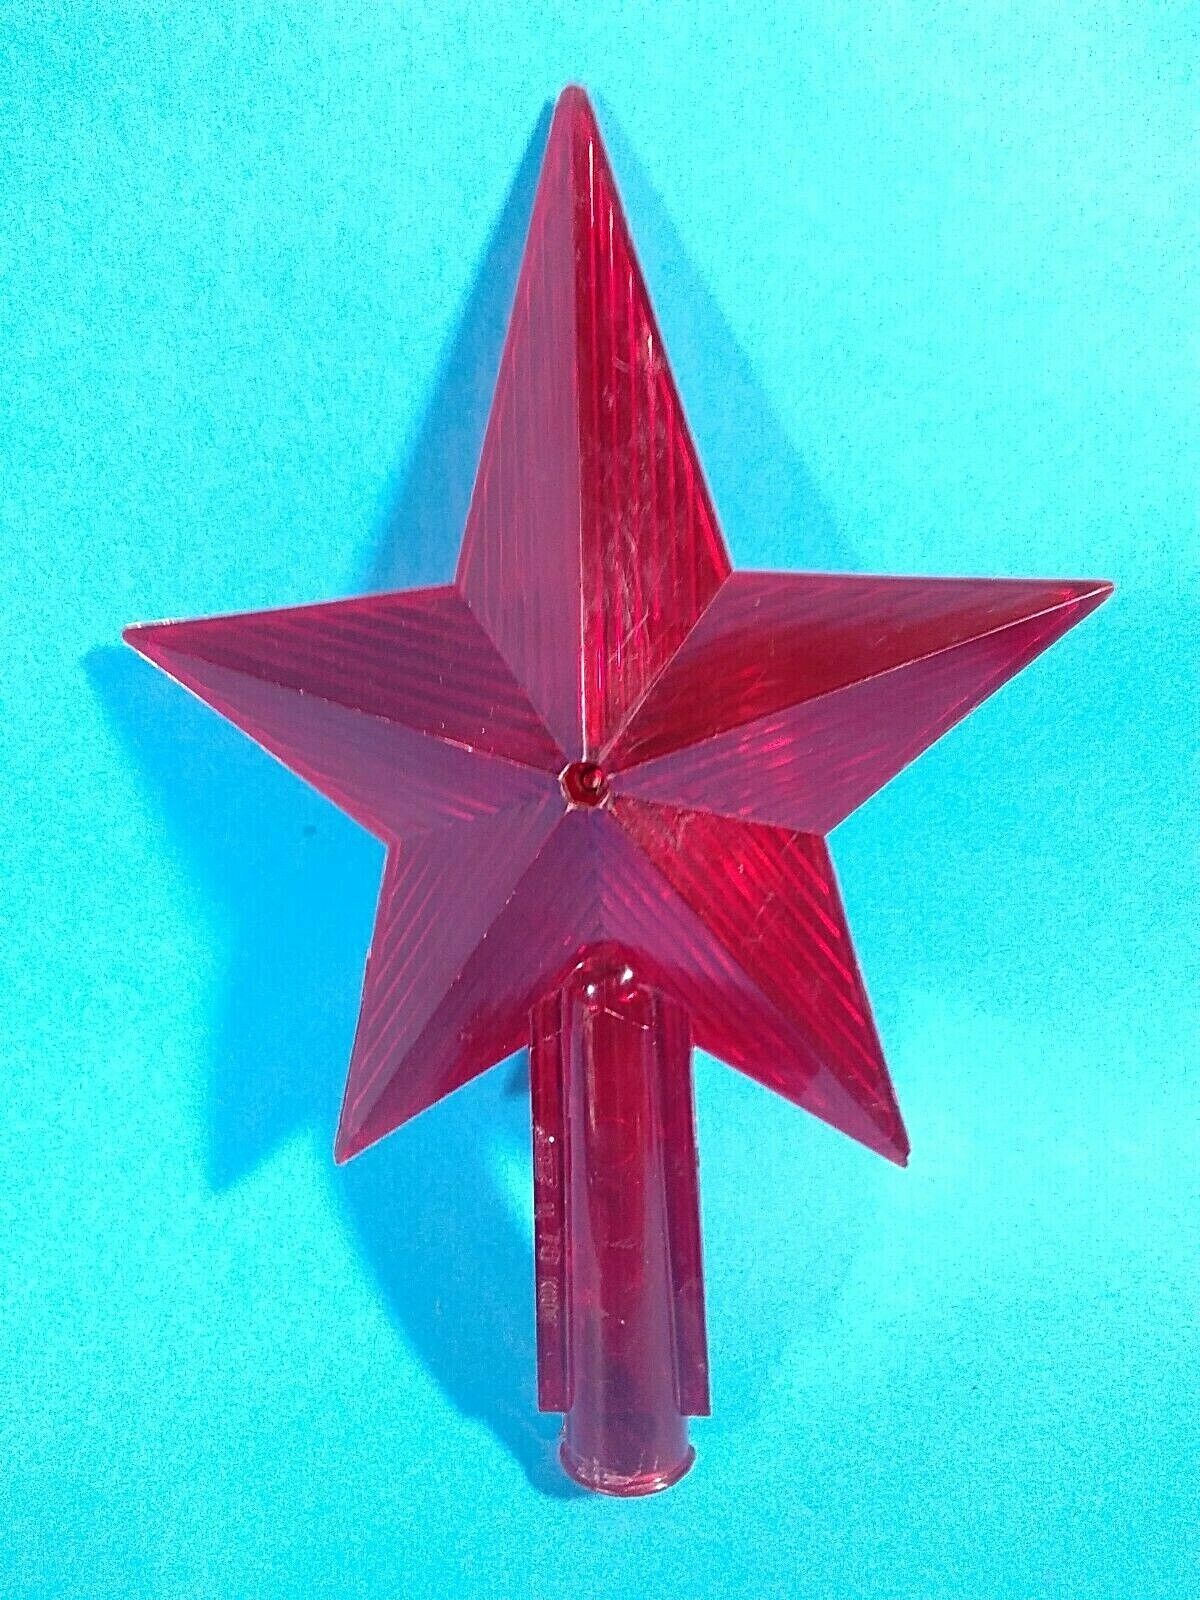 vitage Soviet Russian CHRISTMAS Tree Topper STAR toy ORNAMENTS 70s USSR 3